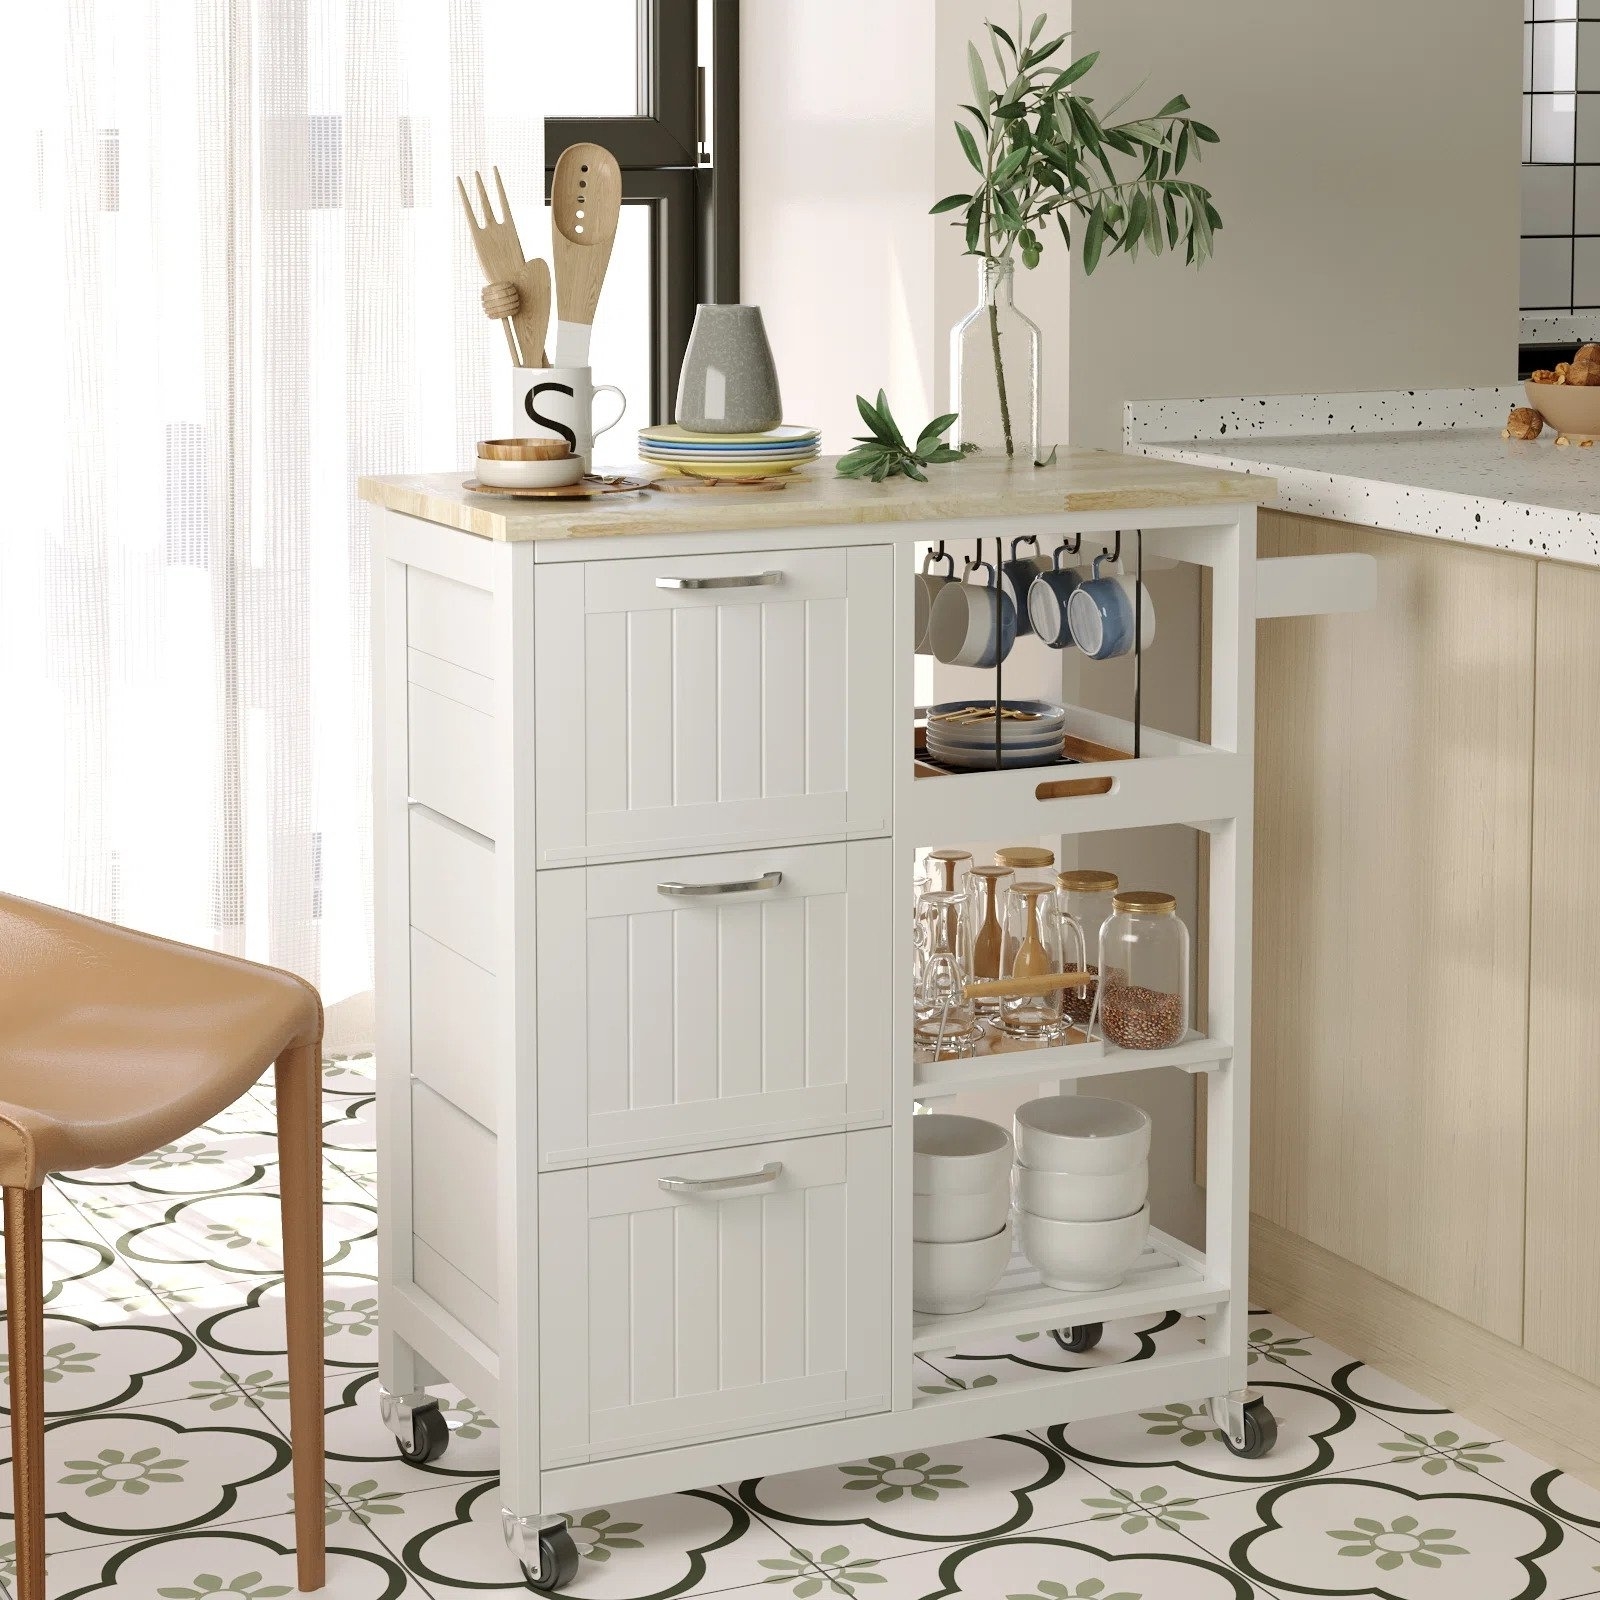 The white kitchen island with a natural wood countertop and silver pulls